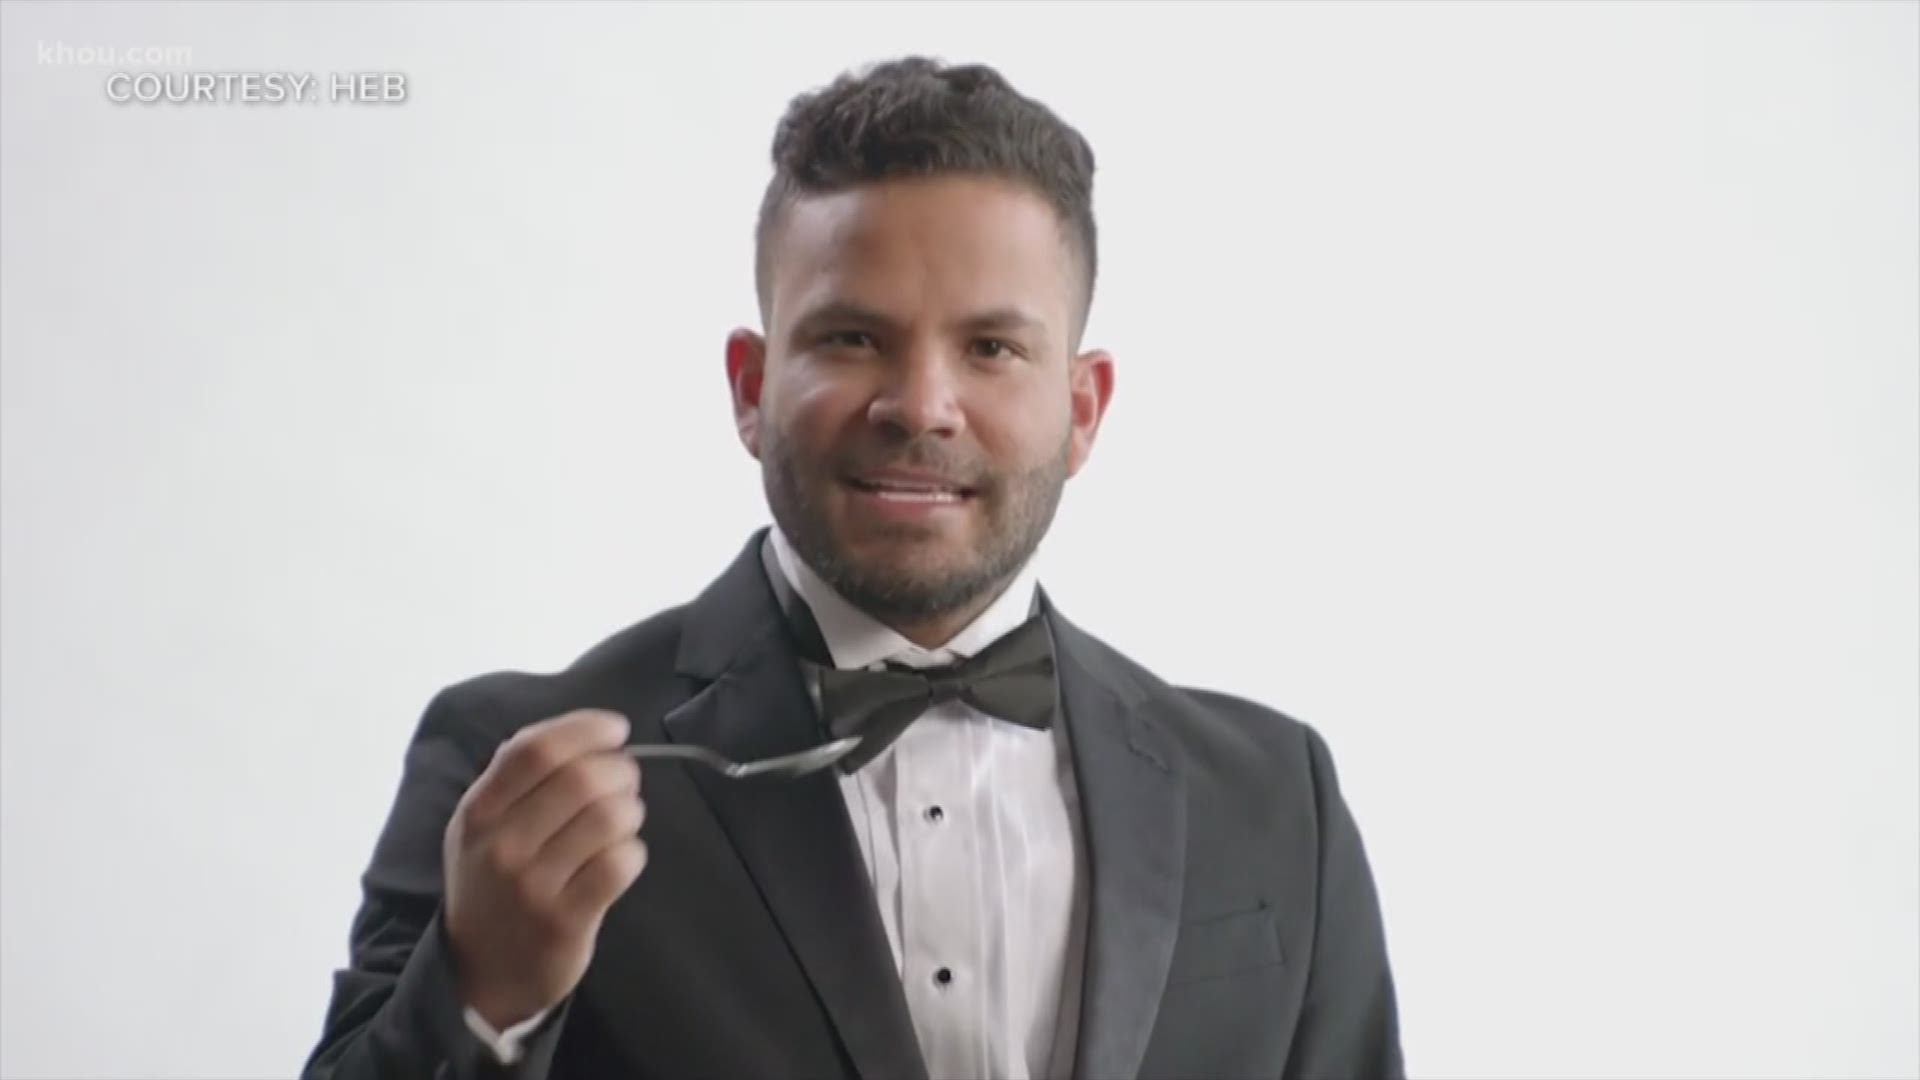 Watch: Astros stars will have you laughing in new H-E-B commercials